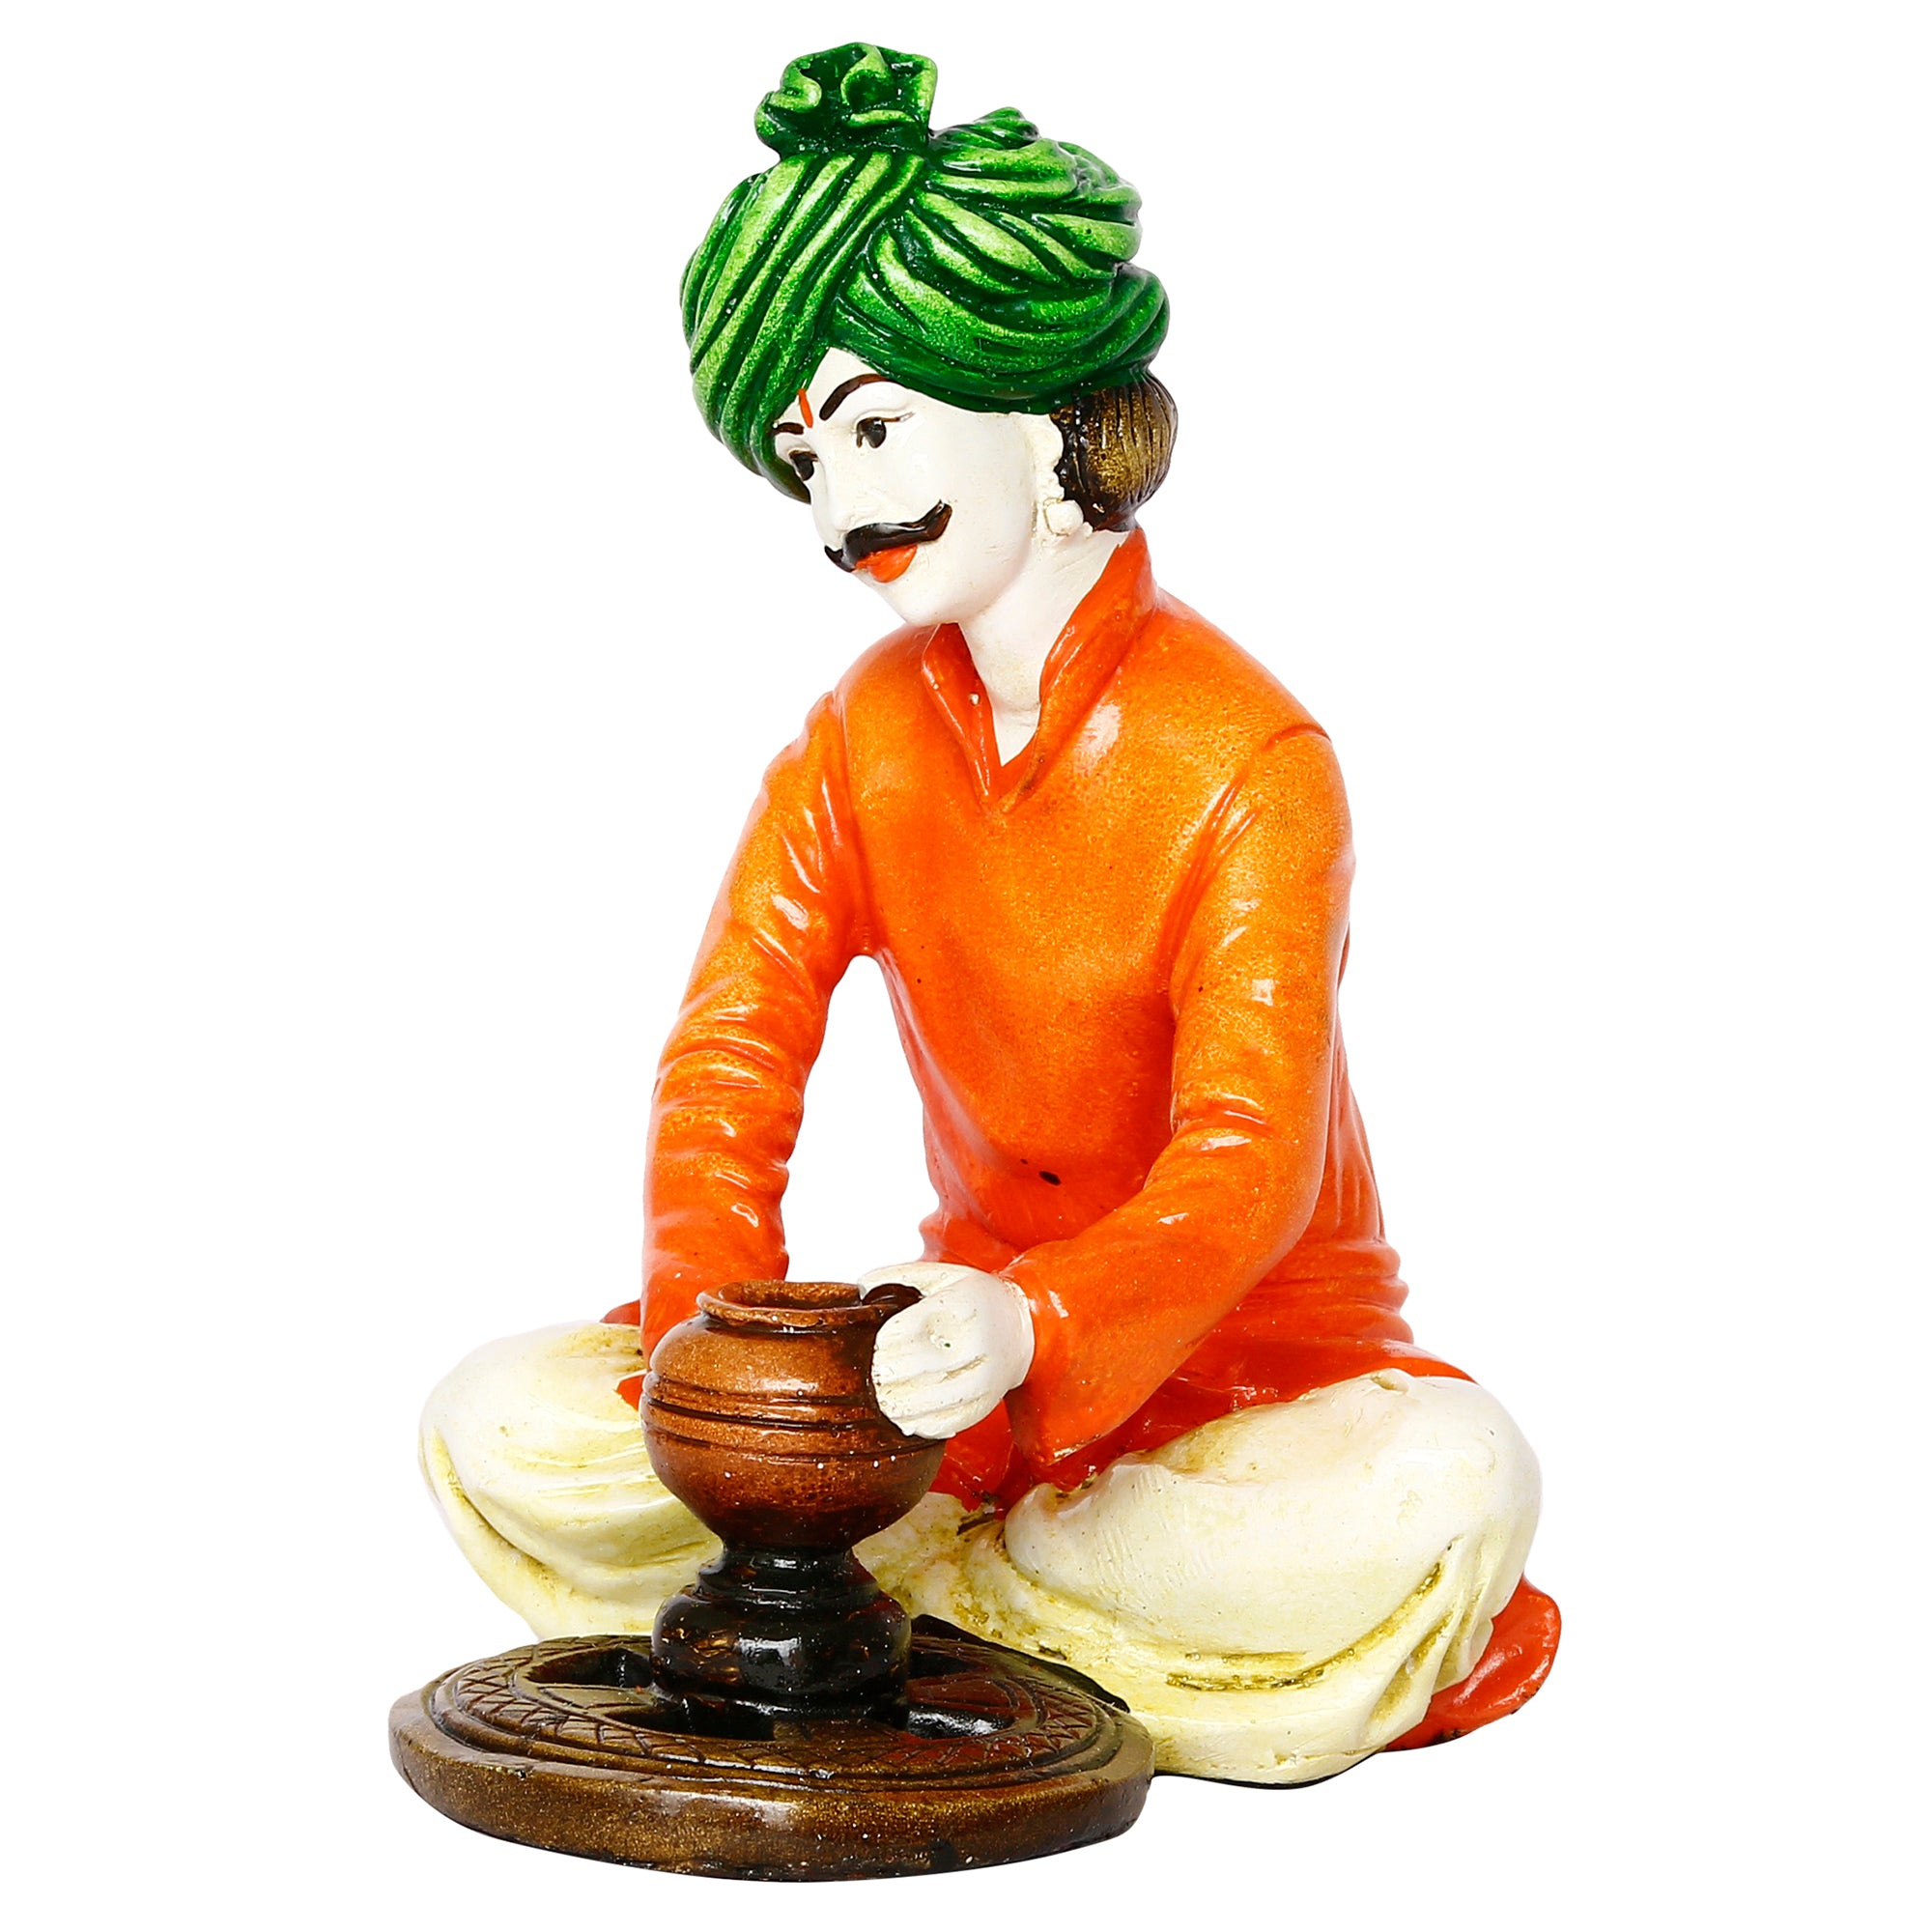 Colorful Rajasthani Man Making Pot Handcrafted Decorative Polyresin Showpiece 4